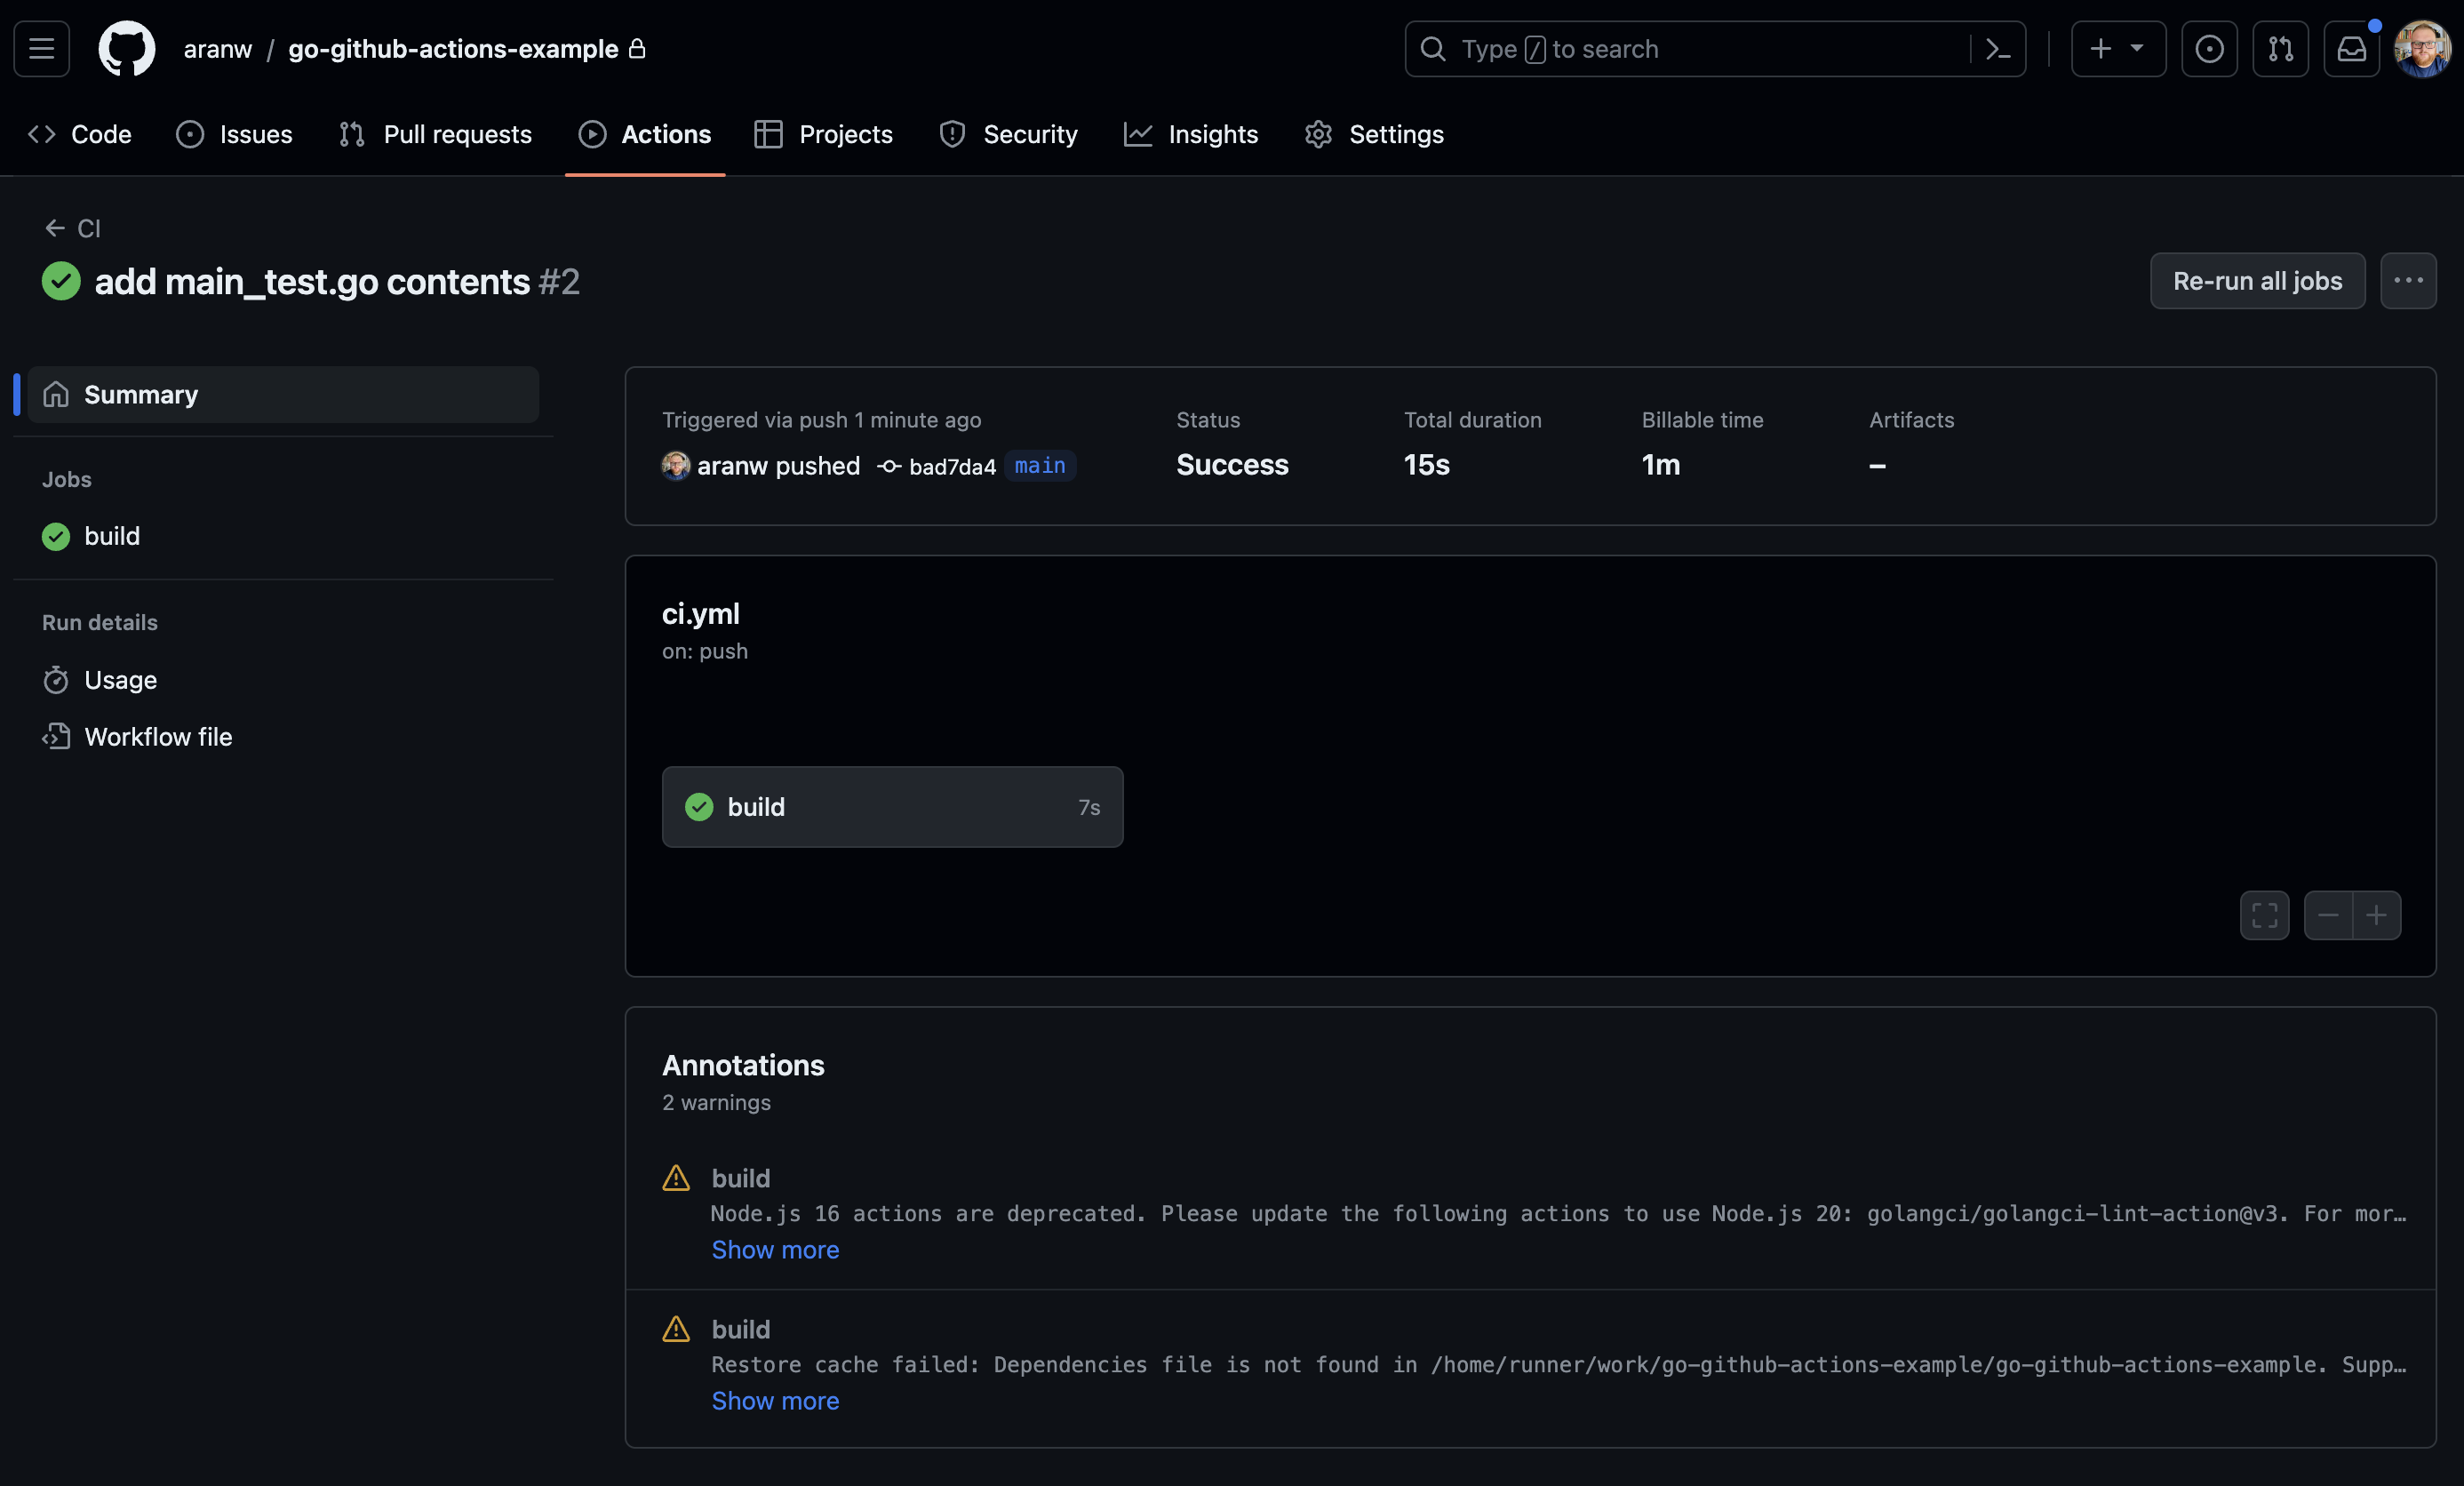 GitHub Actions Workflow Details